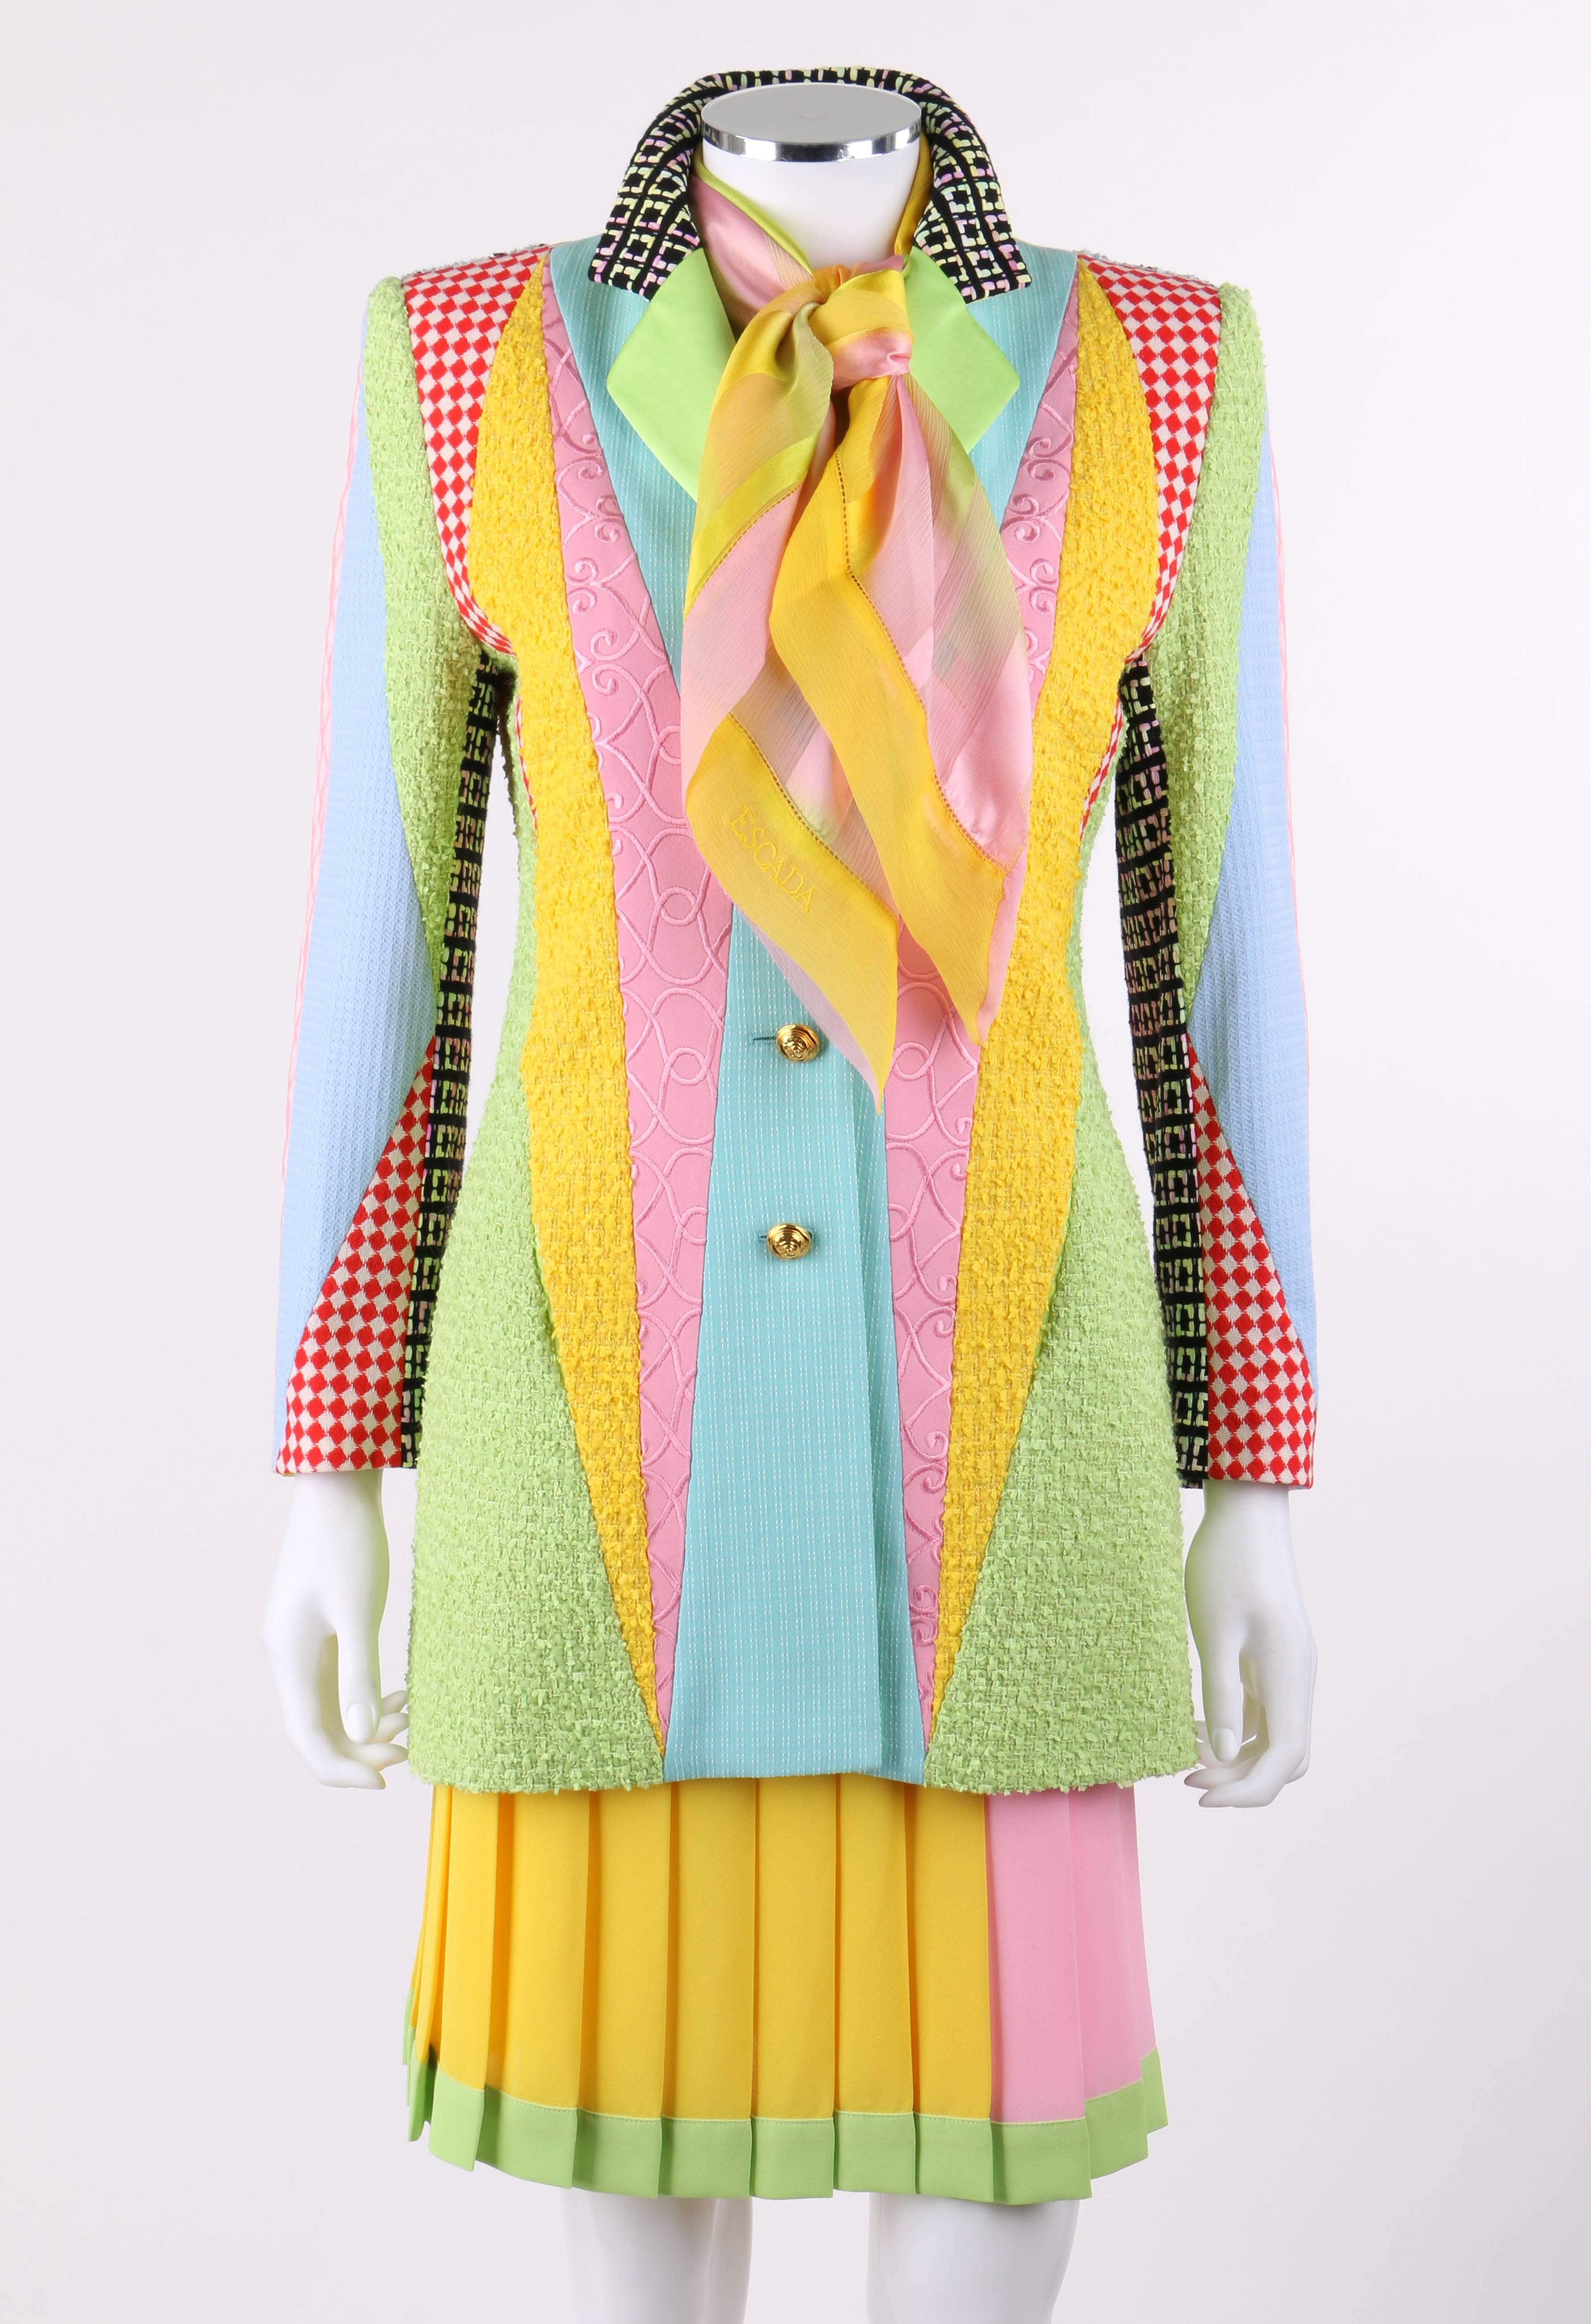 Vintage Escada Margaretha Ley c.1980's three piece patchwork blazer pleated skirt suit set with scarf; New old stock. Designed by Margaretha Ley. Notched lapel collar blazer with multiple patterned panels of boucle, satin, pique, pin check, ornate